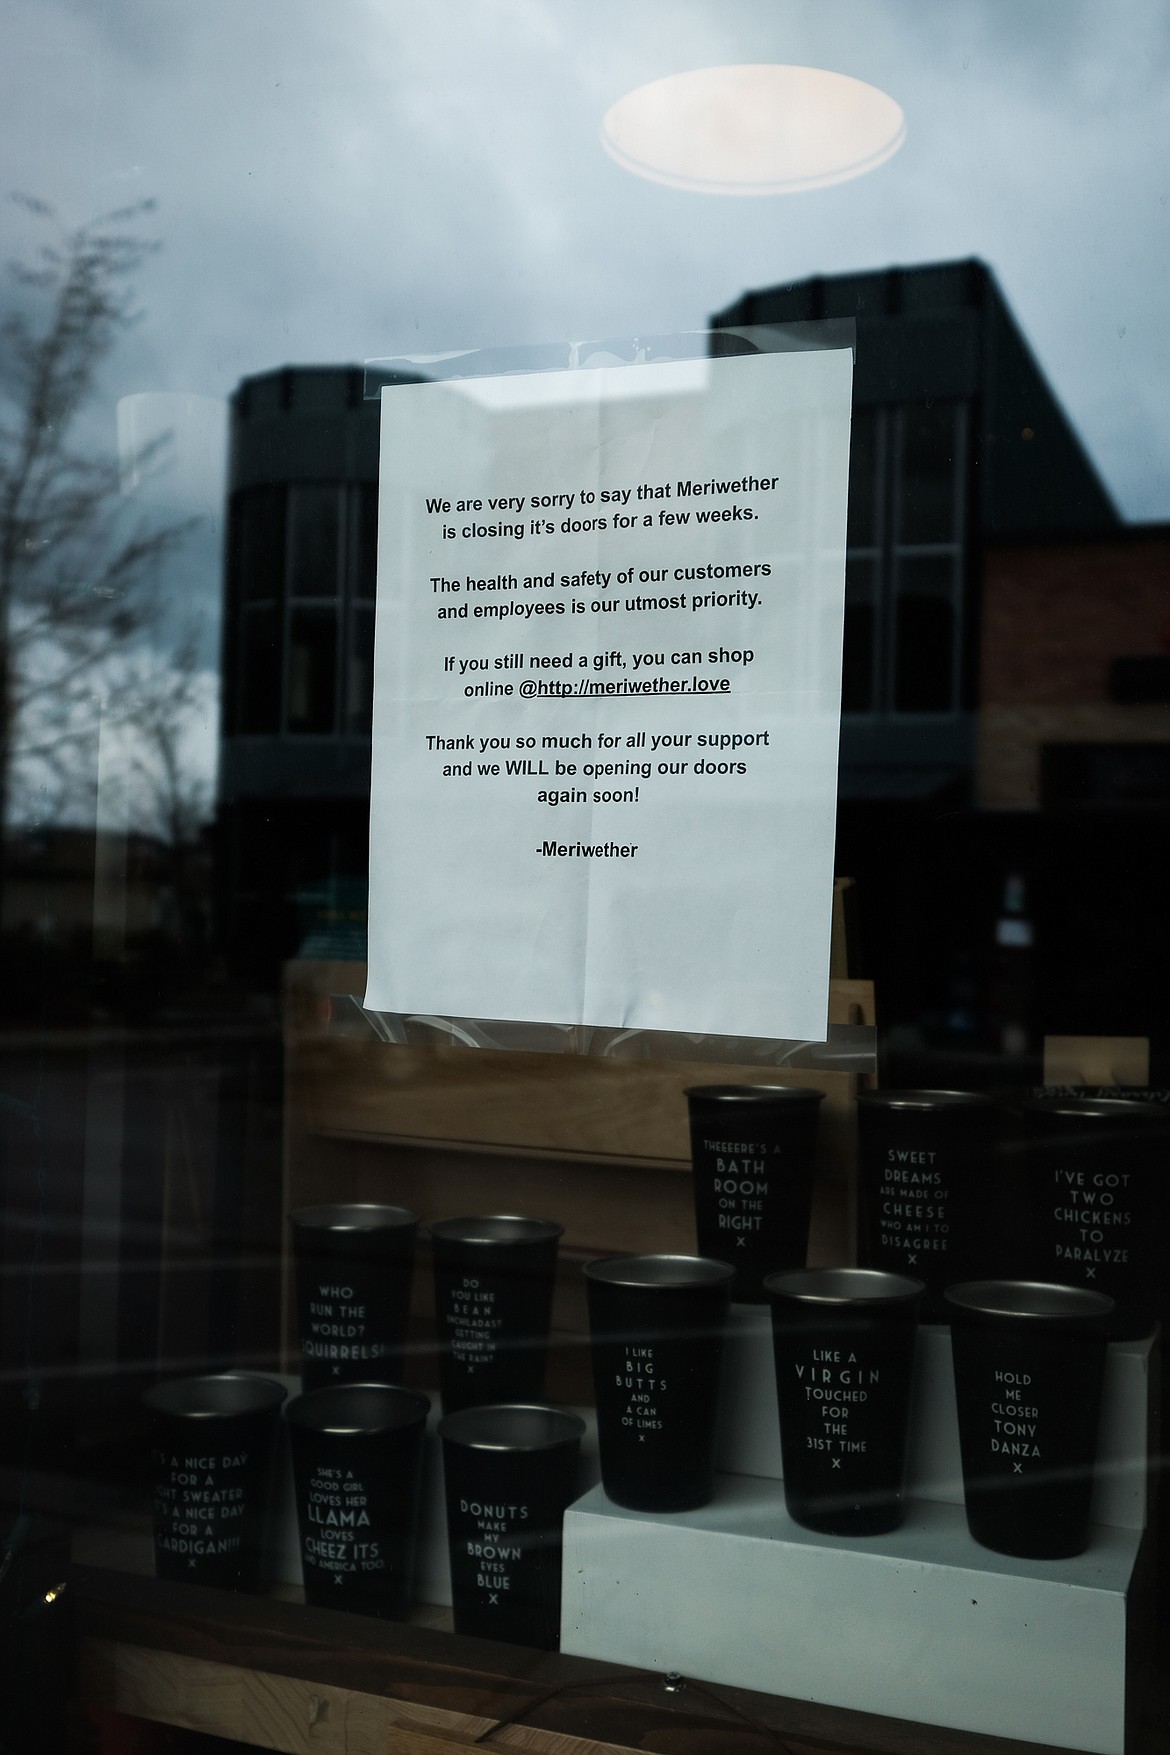 As the coronavirus outbreak forces closures and remote work, businesses in Whitefish are finding different ways to stay afloat. (Daniel McKay/Whitefish Pilot)